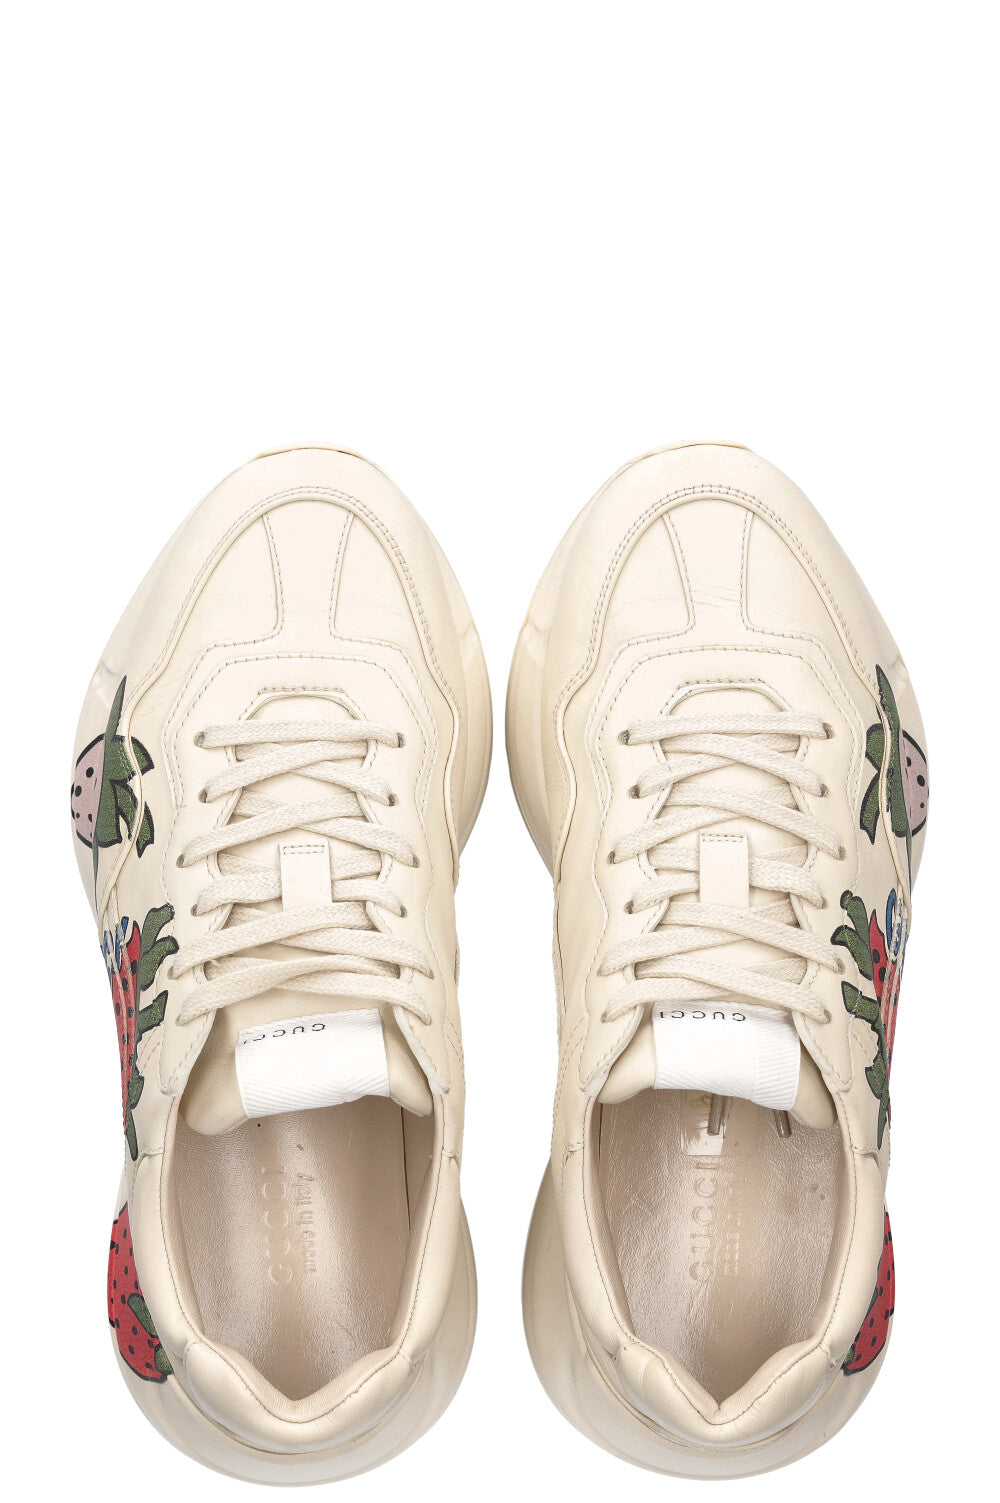 GUCCI Rython Sneakers Strawberries